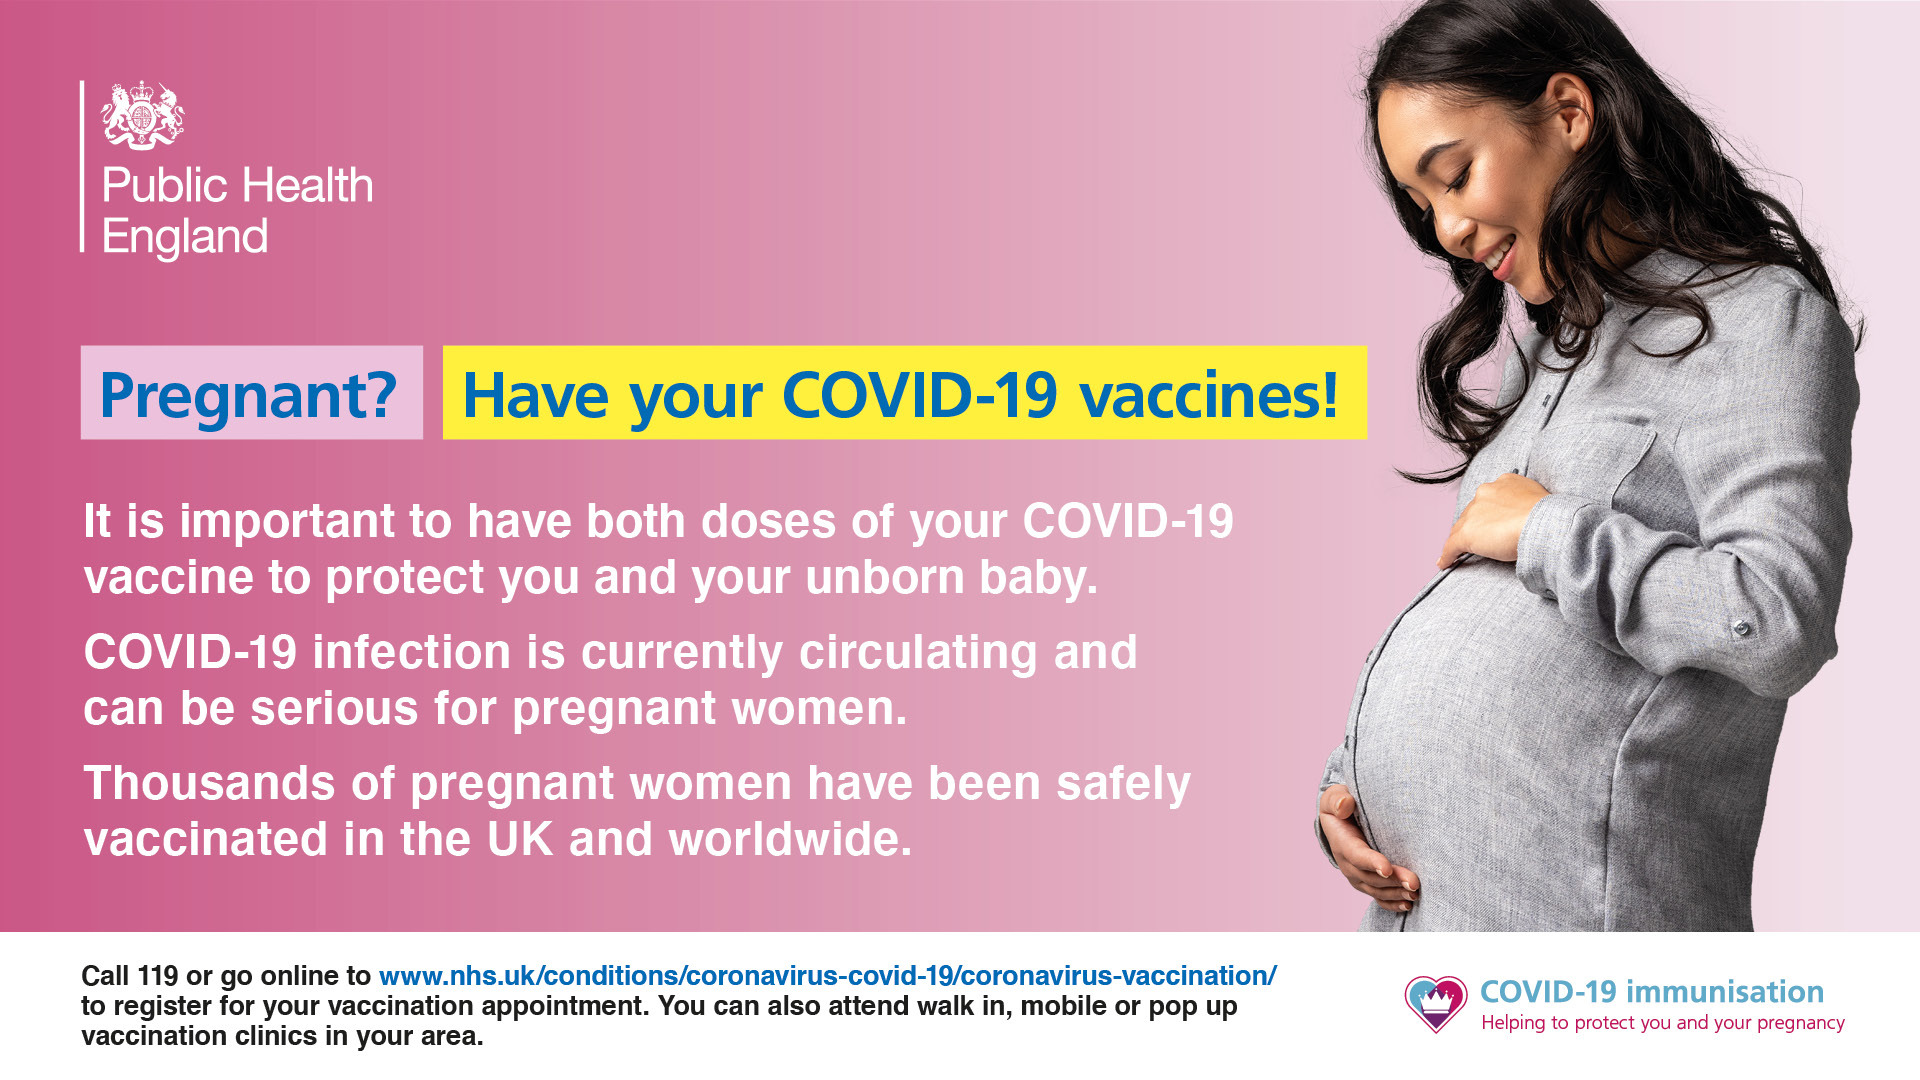 Pregnant? Have your COVID-19 vaccines!